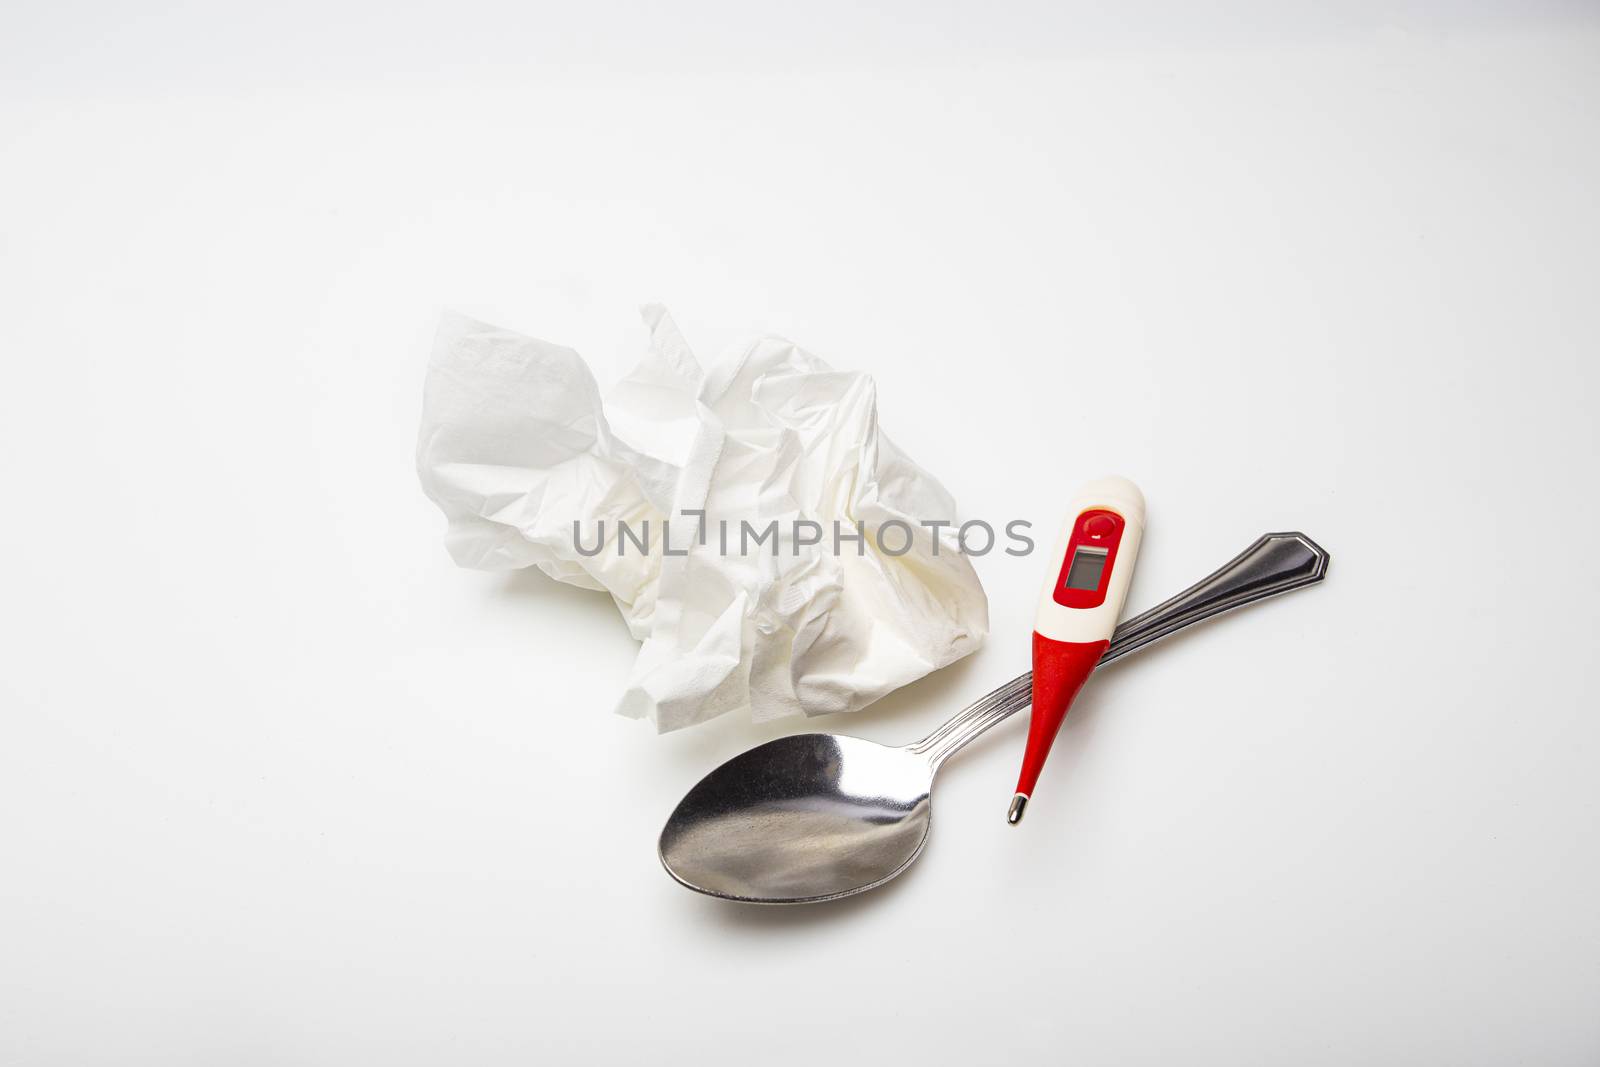 thermometer, spoon and crush tissue against a white background